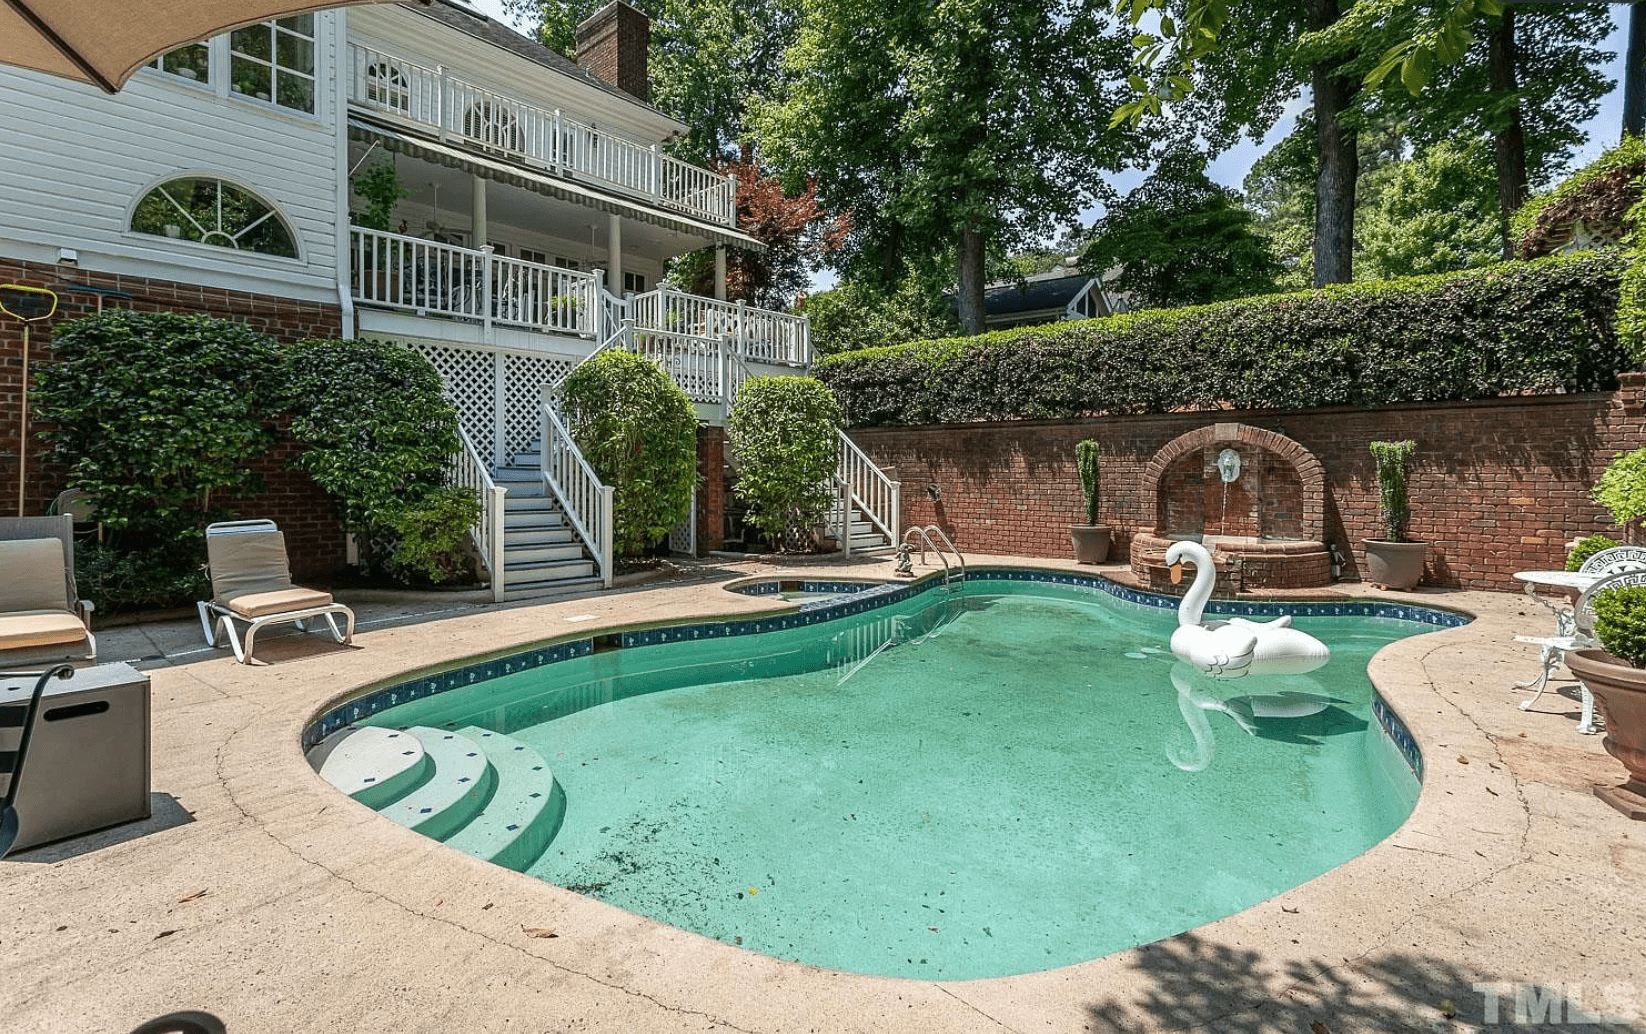 A light teal swimming pool with a floating swan, large privacy wall and hedge, and twin staircases leading to a back deck on a two-story white home